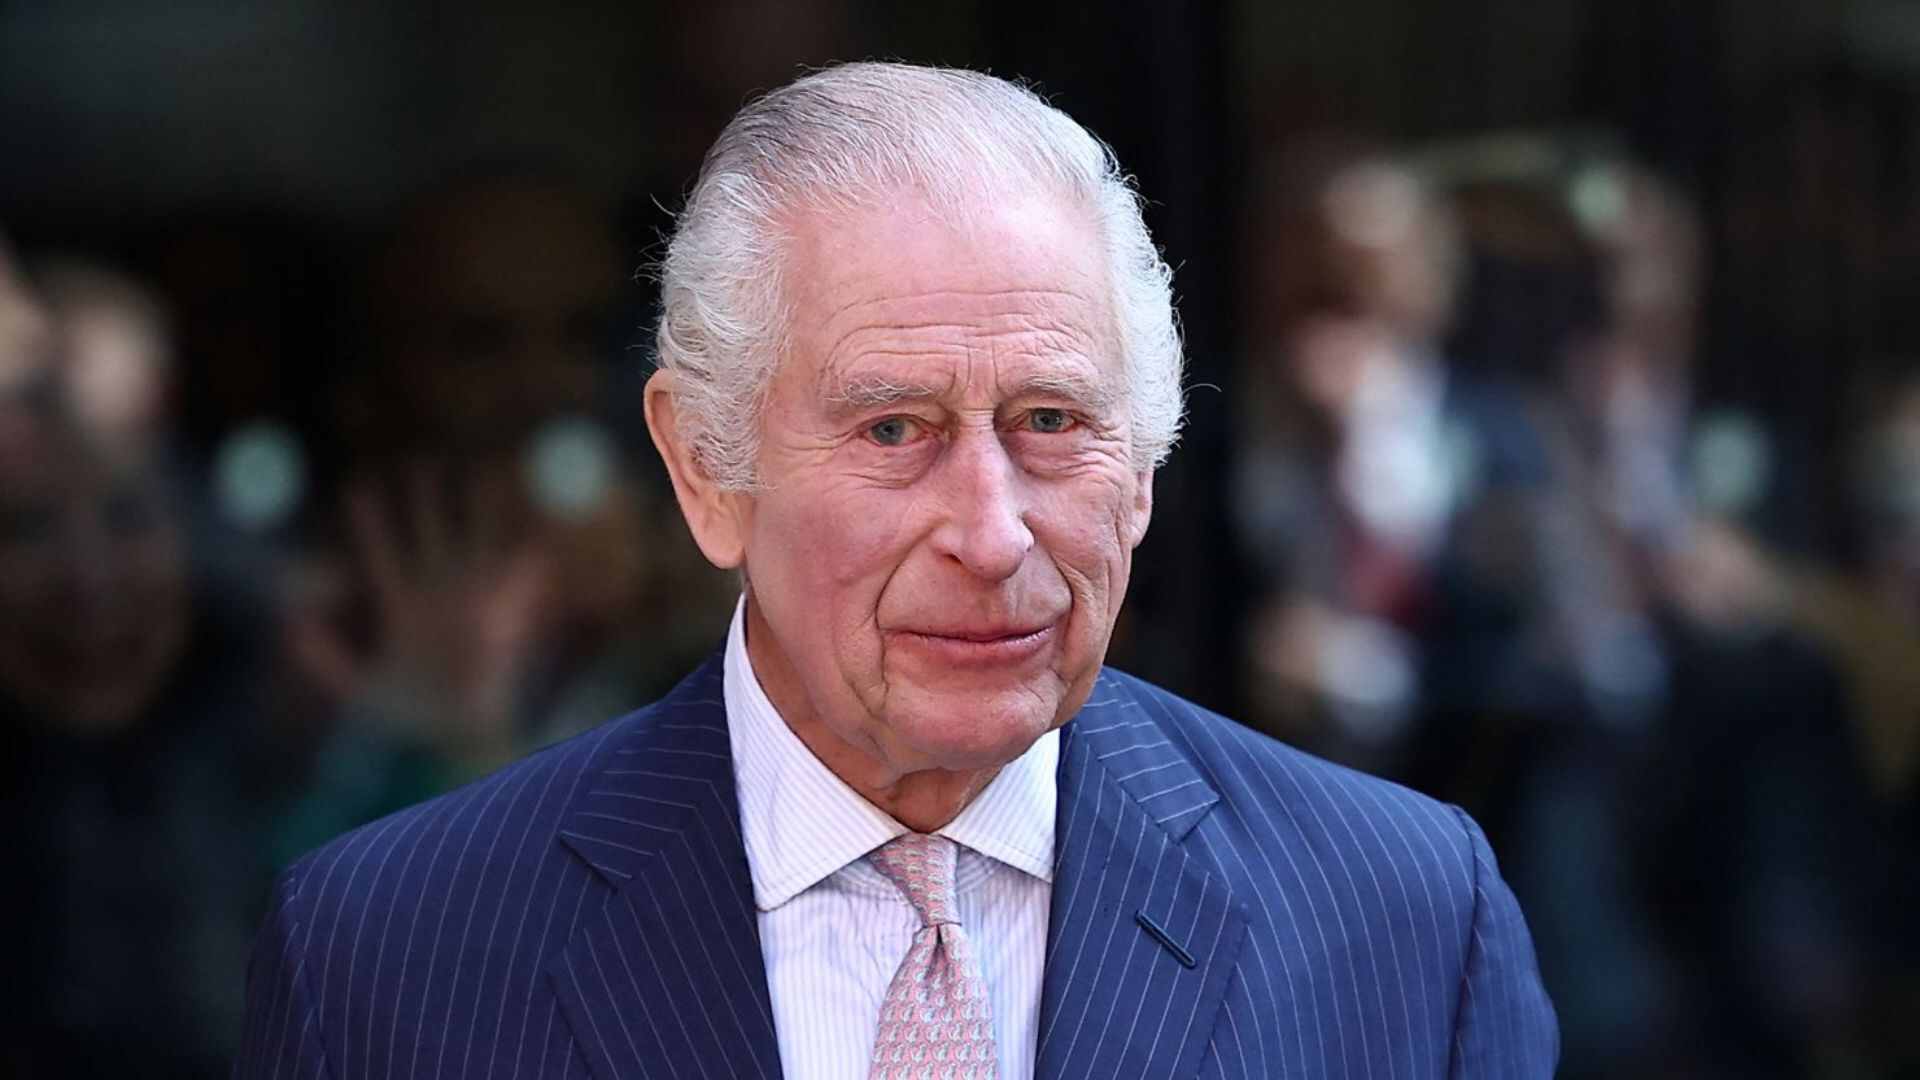 King Charles III Plans U.S. Visit To Reunite With Prince Harry Amid Royal Family Tensions